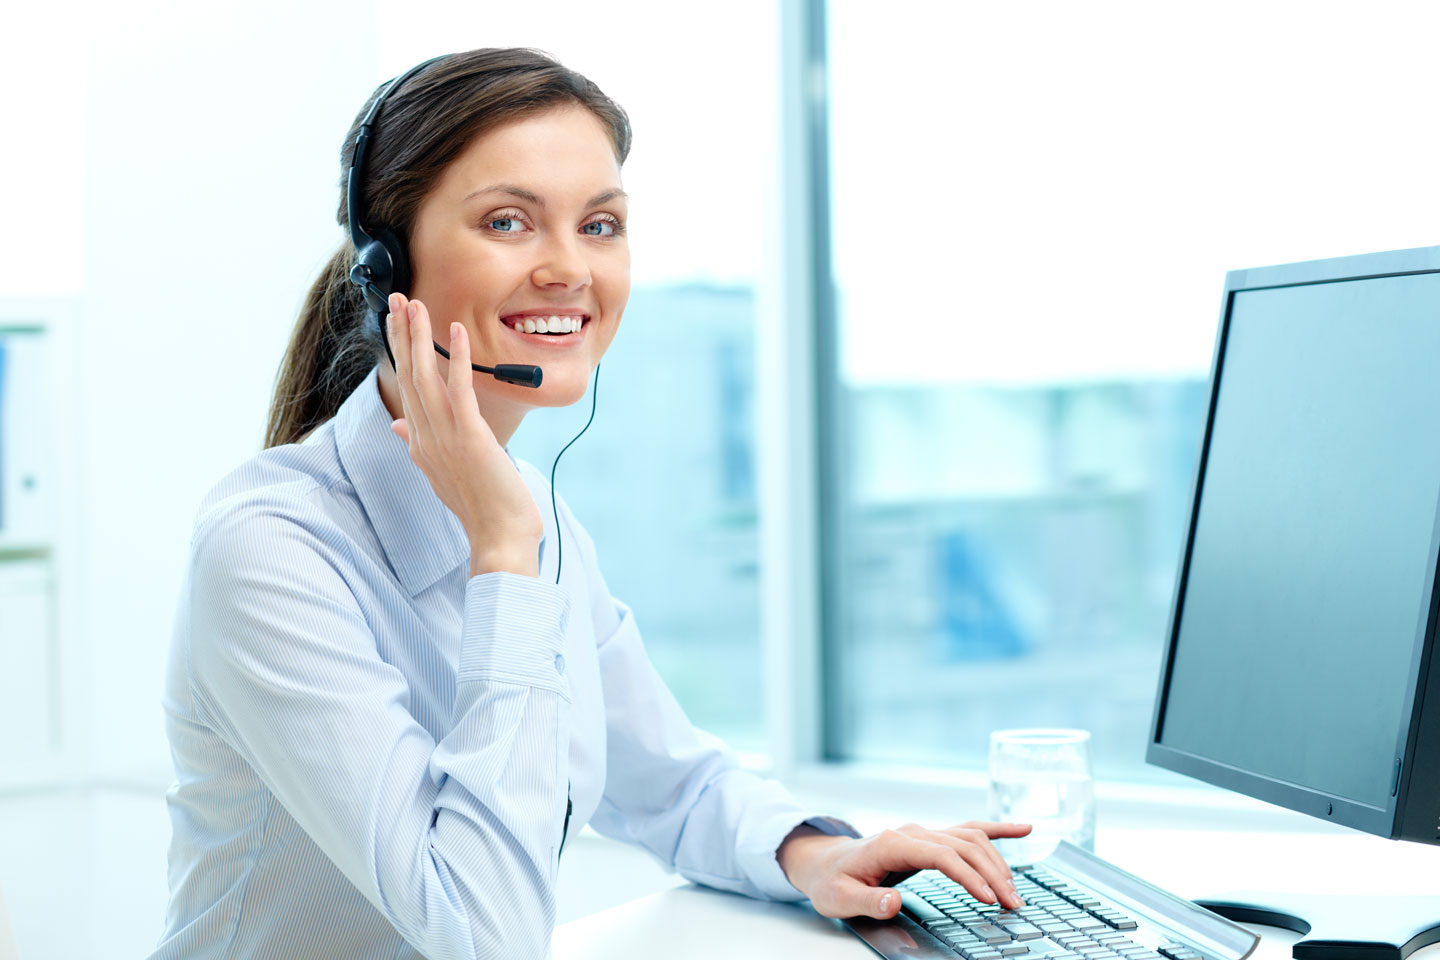 Contact Center Services In India, call center solutions, inbound and outbound call center services in India